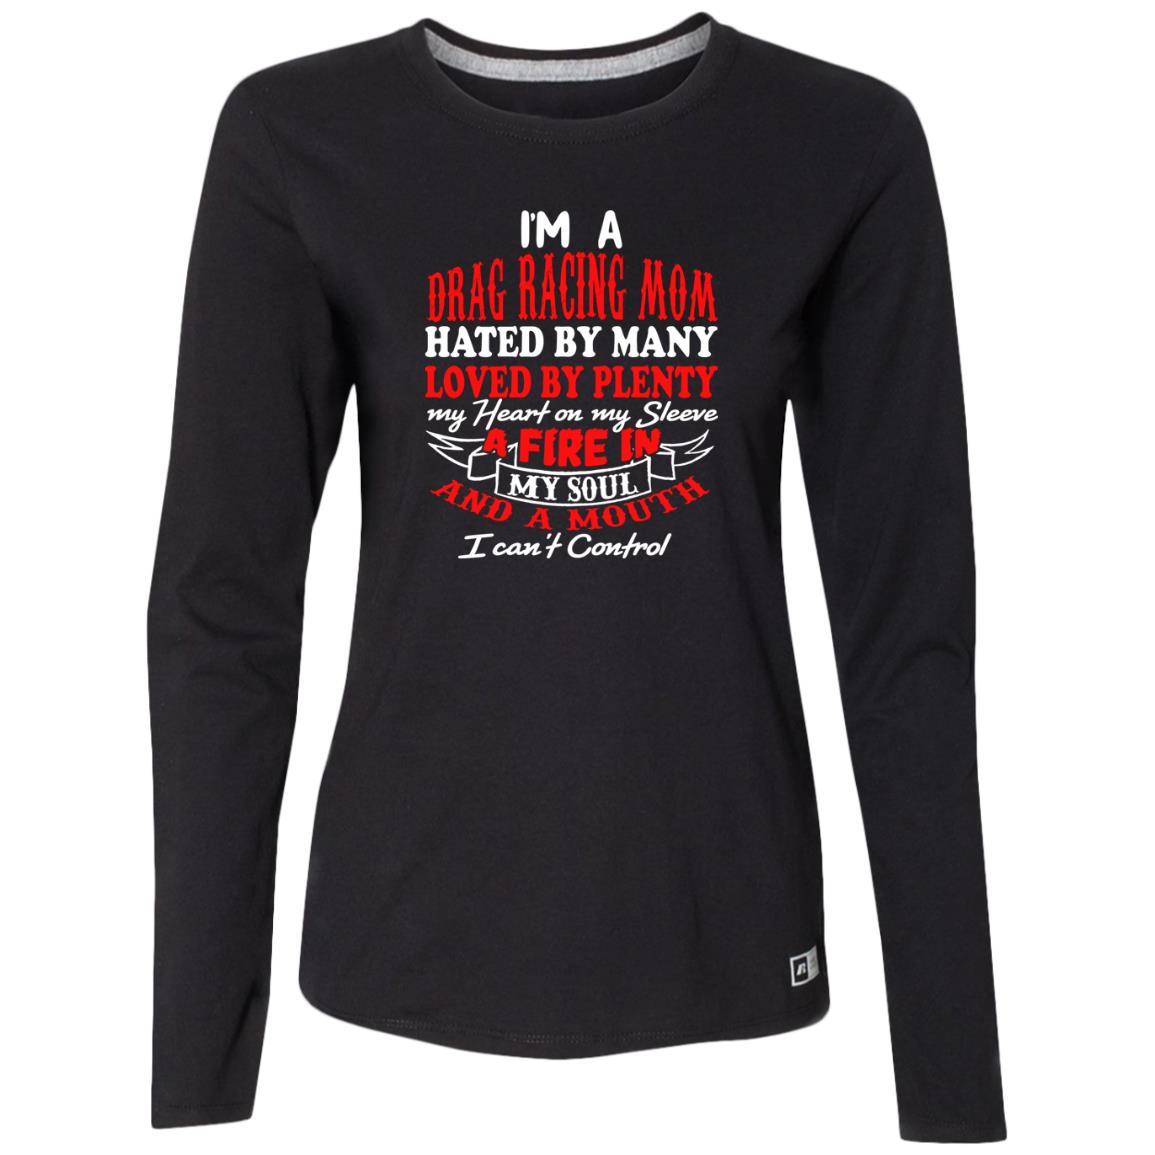 I'm A Drag Racing Mom Hated By Many Loved By Plenty Ladies’ Essential Dri-Power Long Sleeve Tee